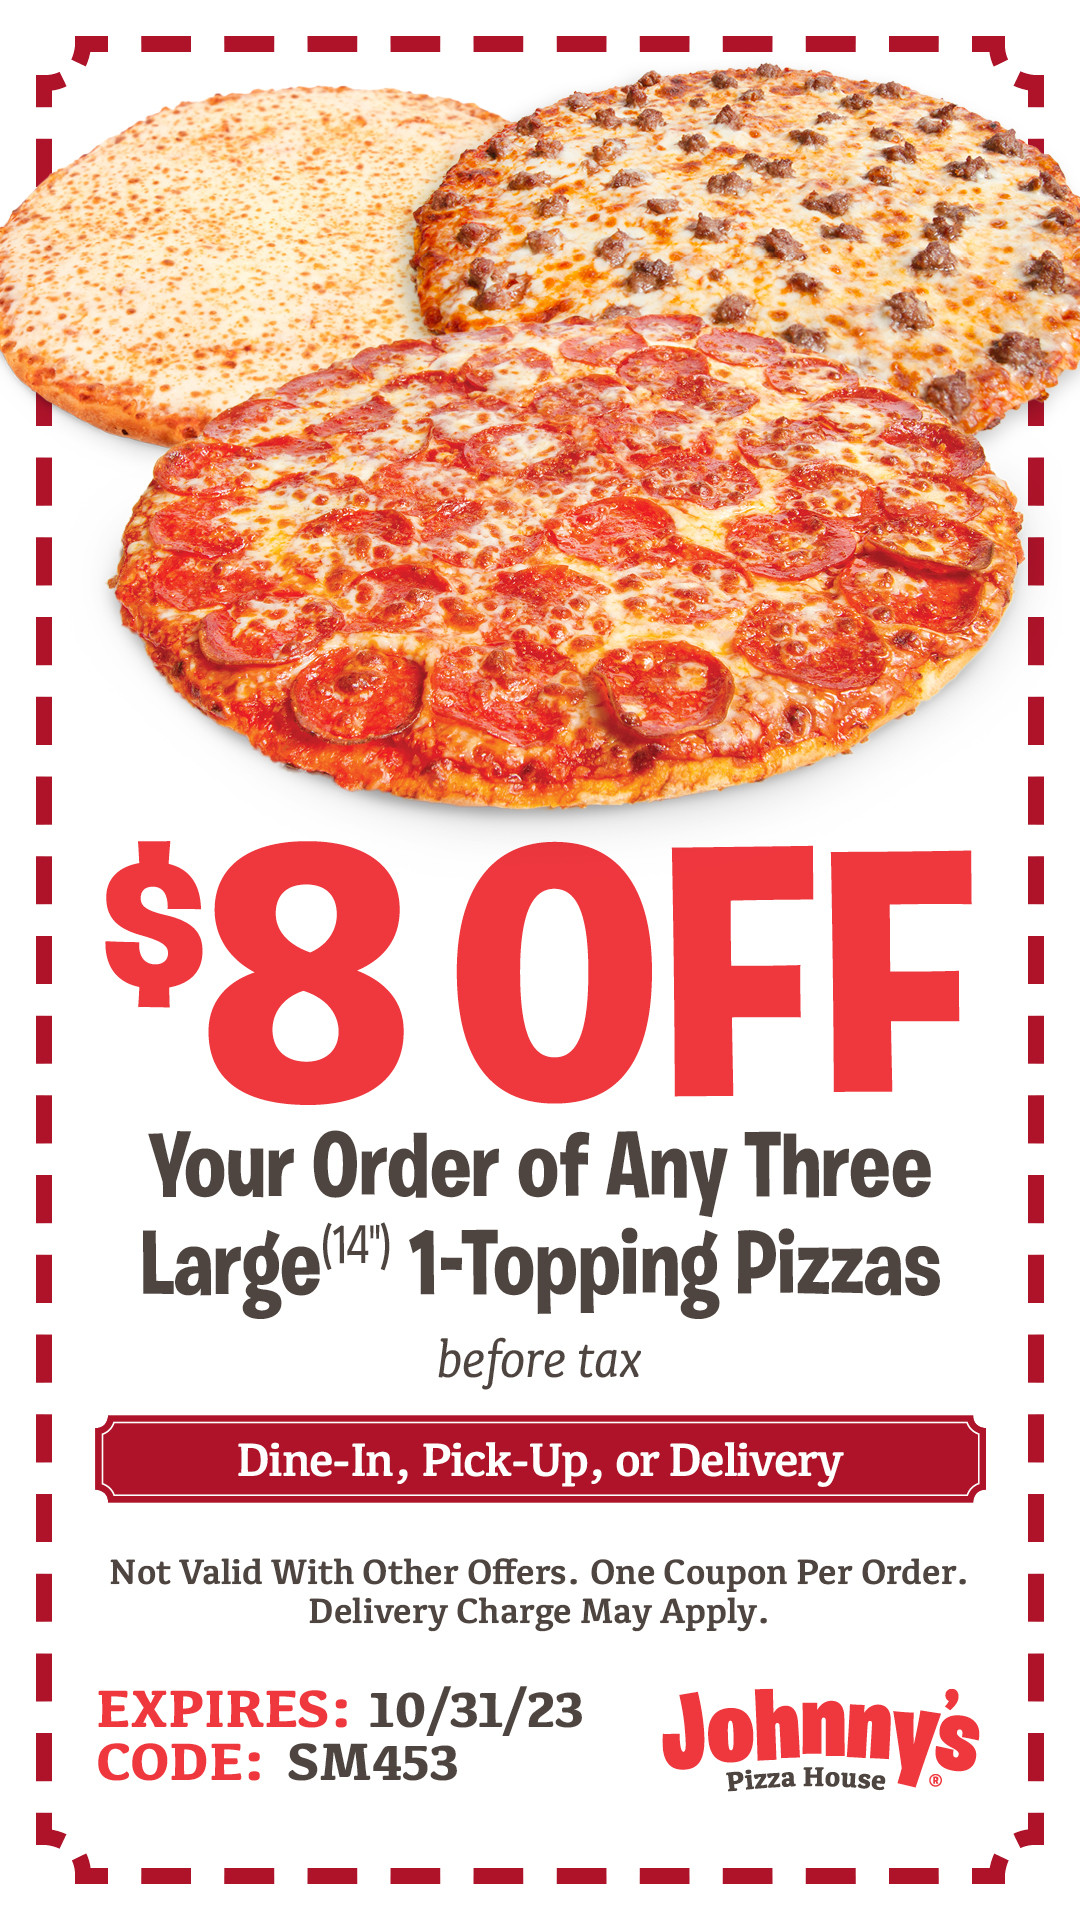 Johnny's Pizza House National Pizza Month Buy Any 3 Large Pizzas, Get $8 Off